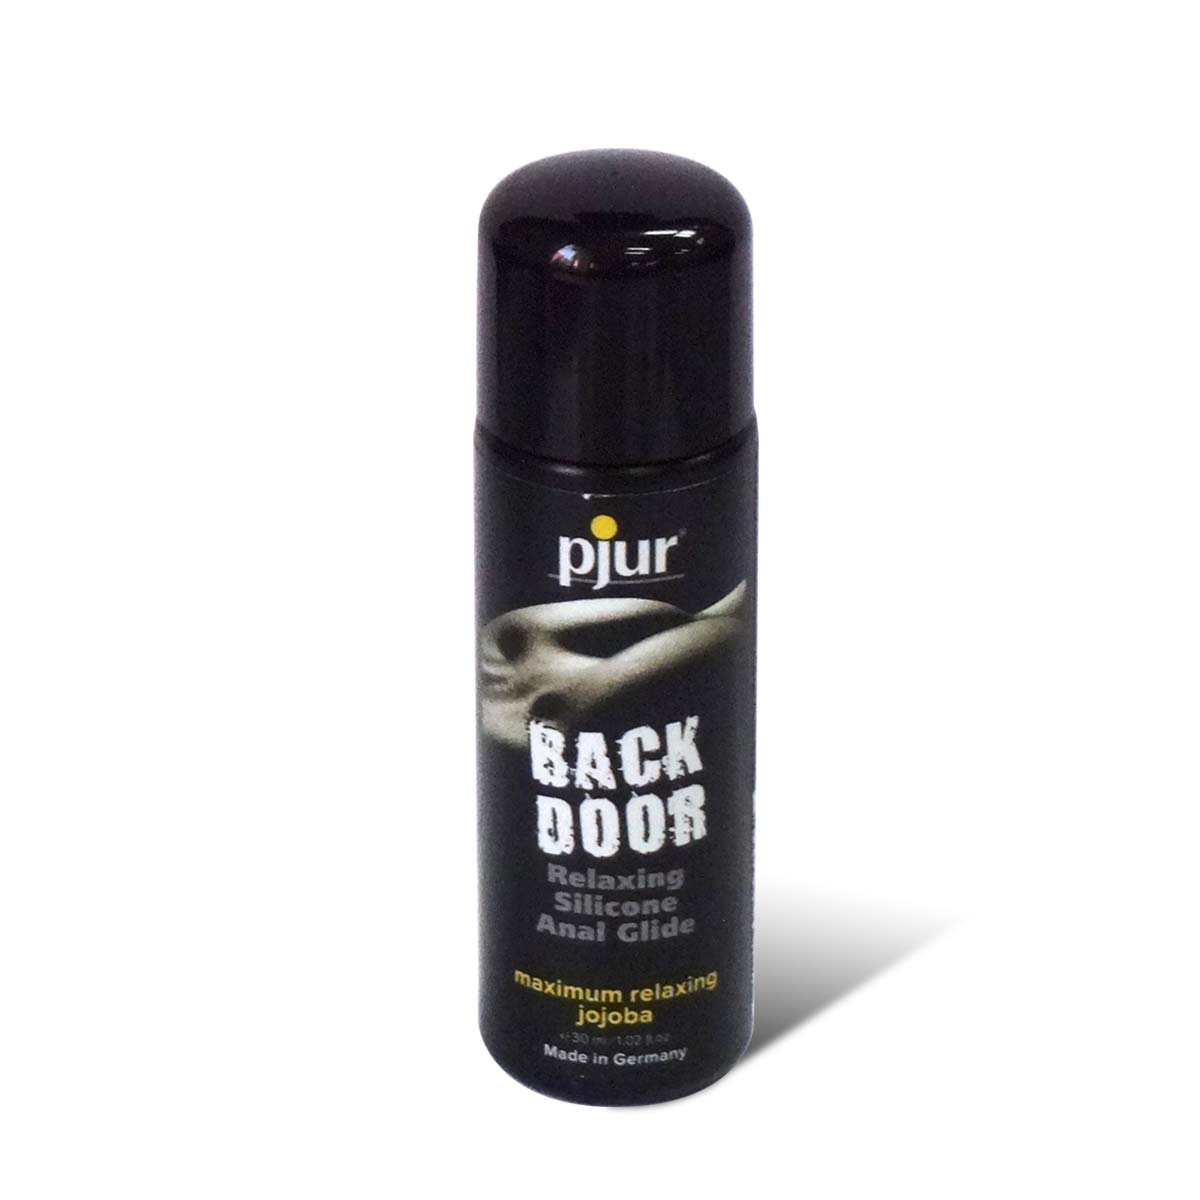 pjur BACK DOOR RELAXING Silicone Anal Glide 30ml Silicone-based Lubricant-p_1